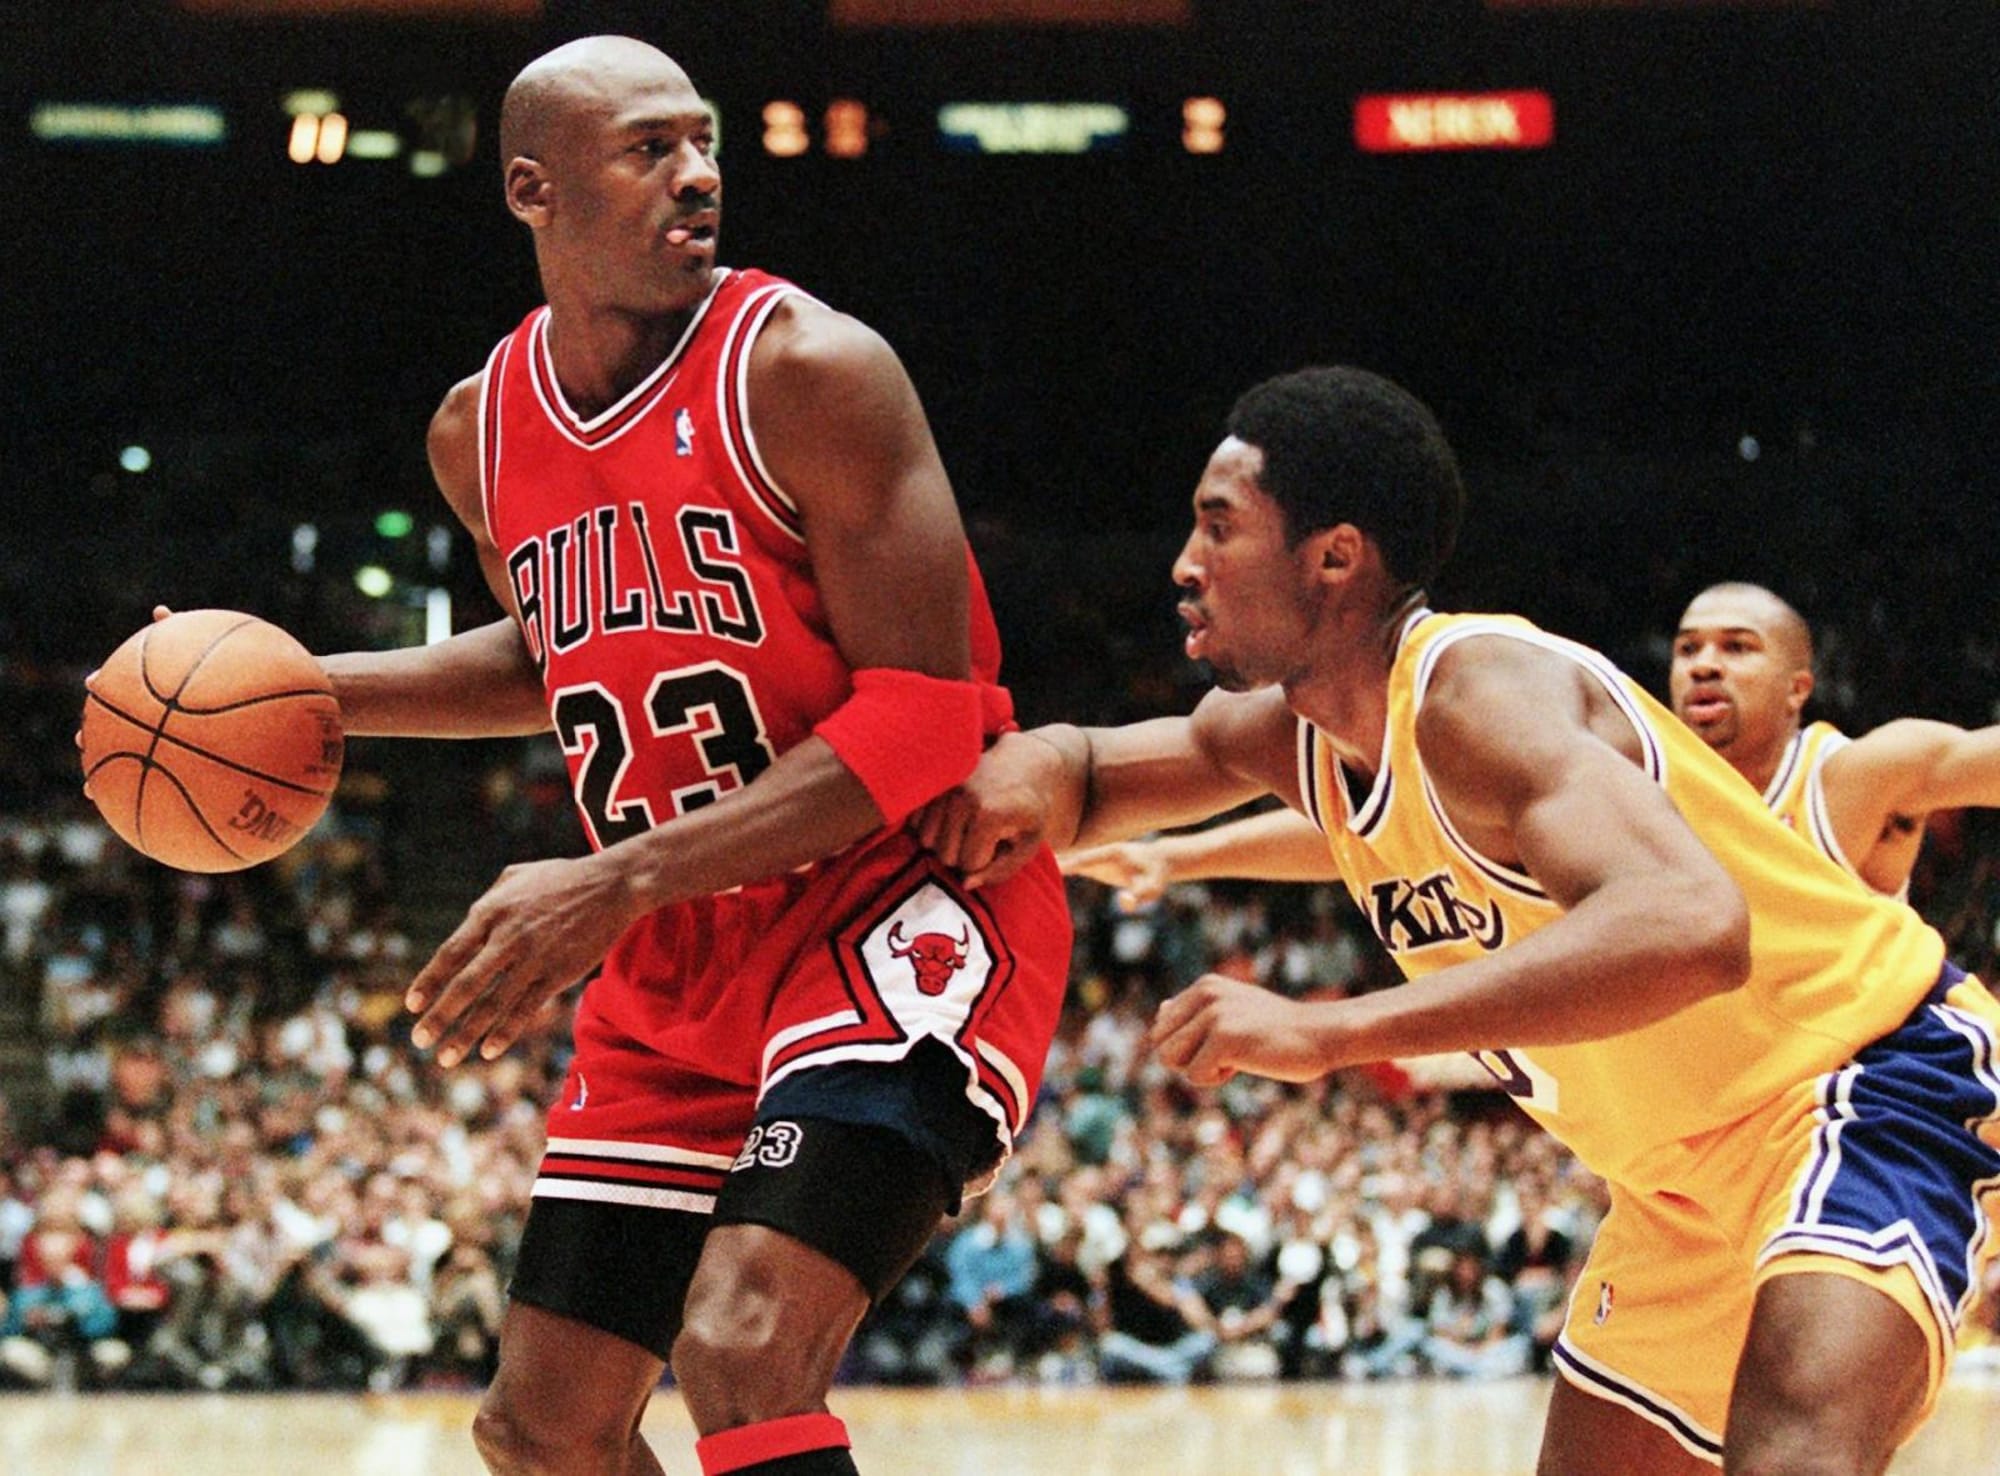 Ranking the greatest 75 NBA players of all time: Nos. 25-1